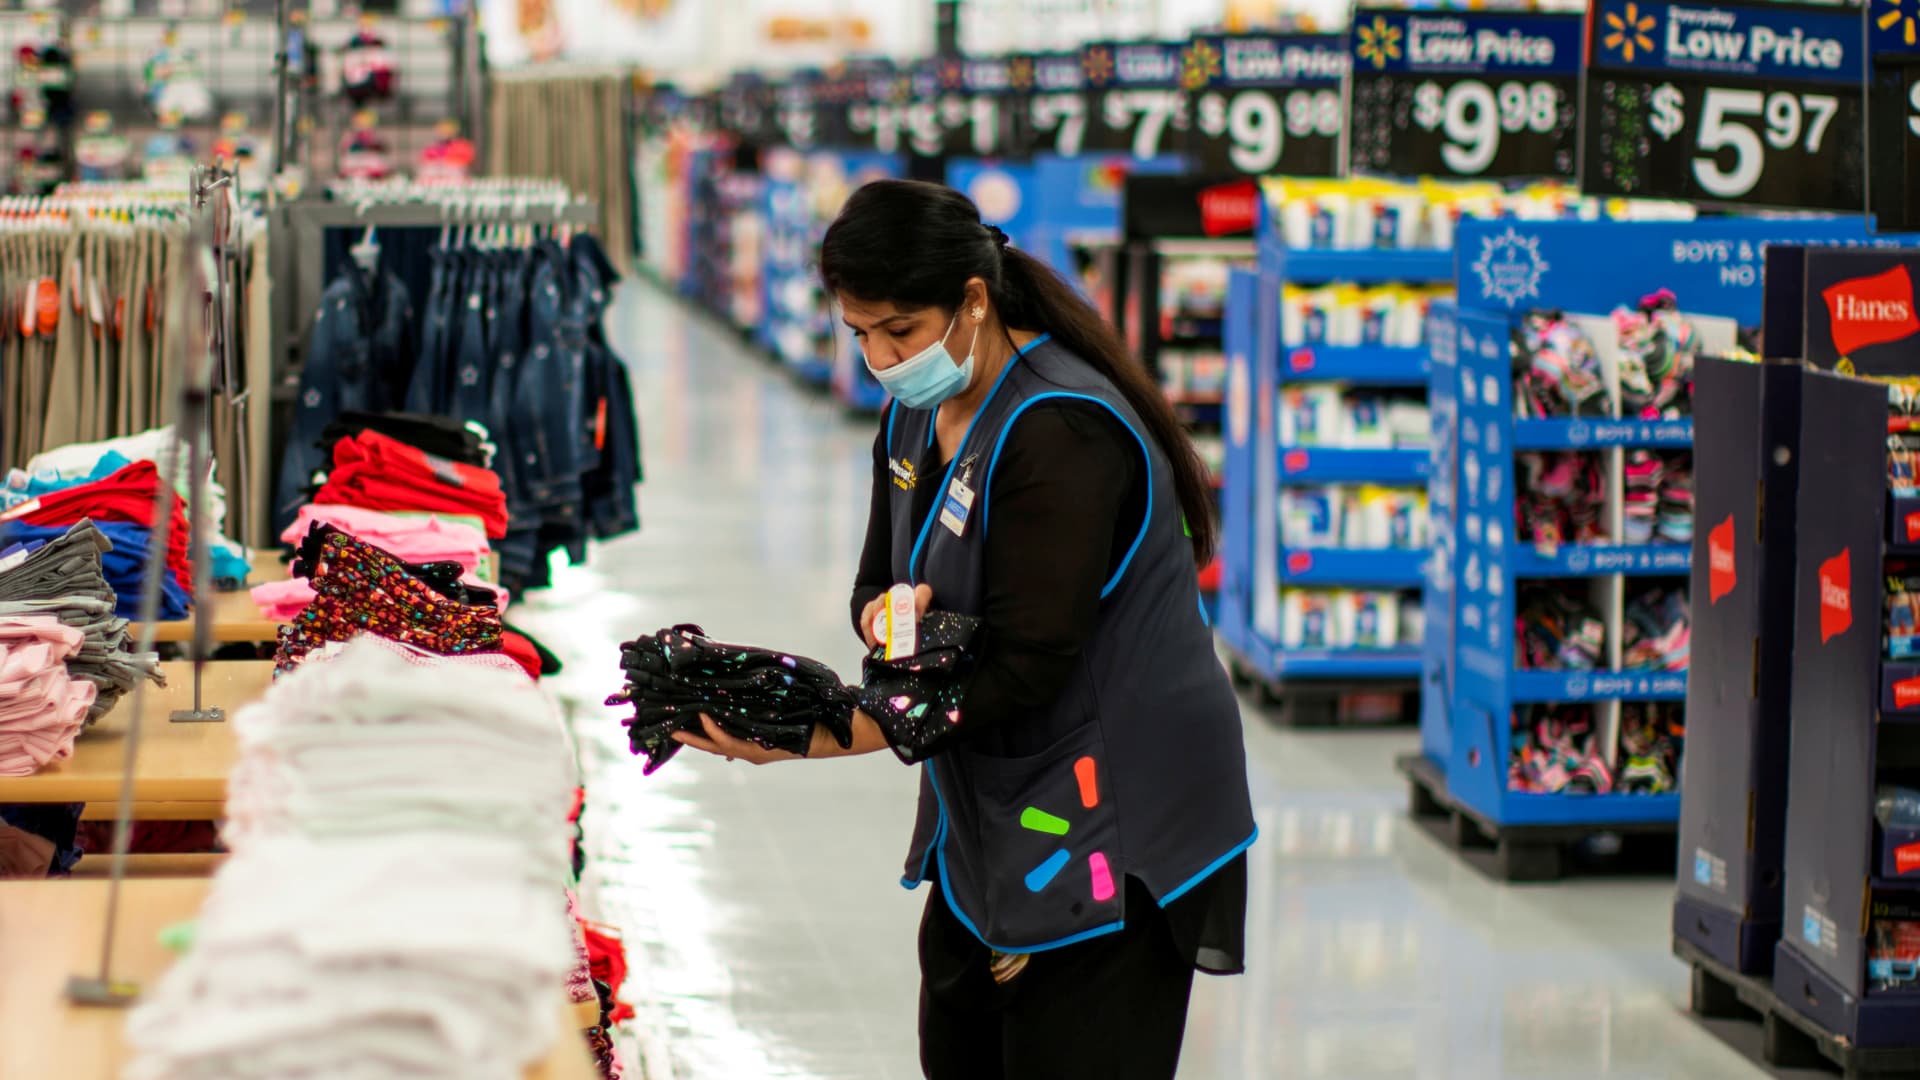 Walmart Raises Starting Wages for Store Workers - The New York Times